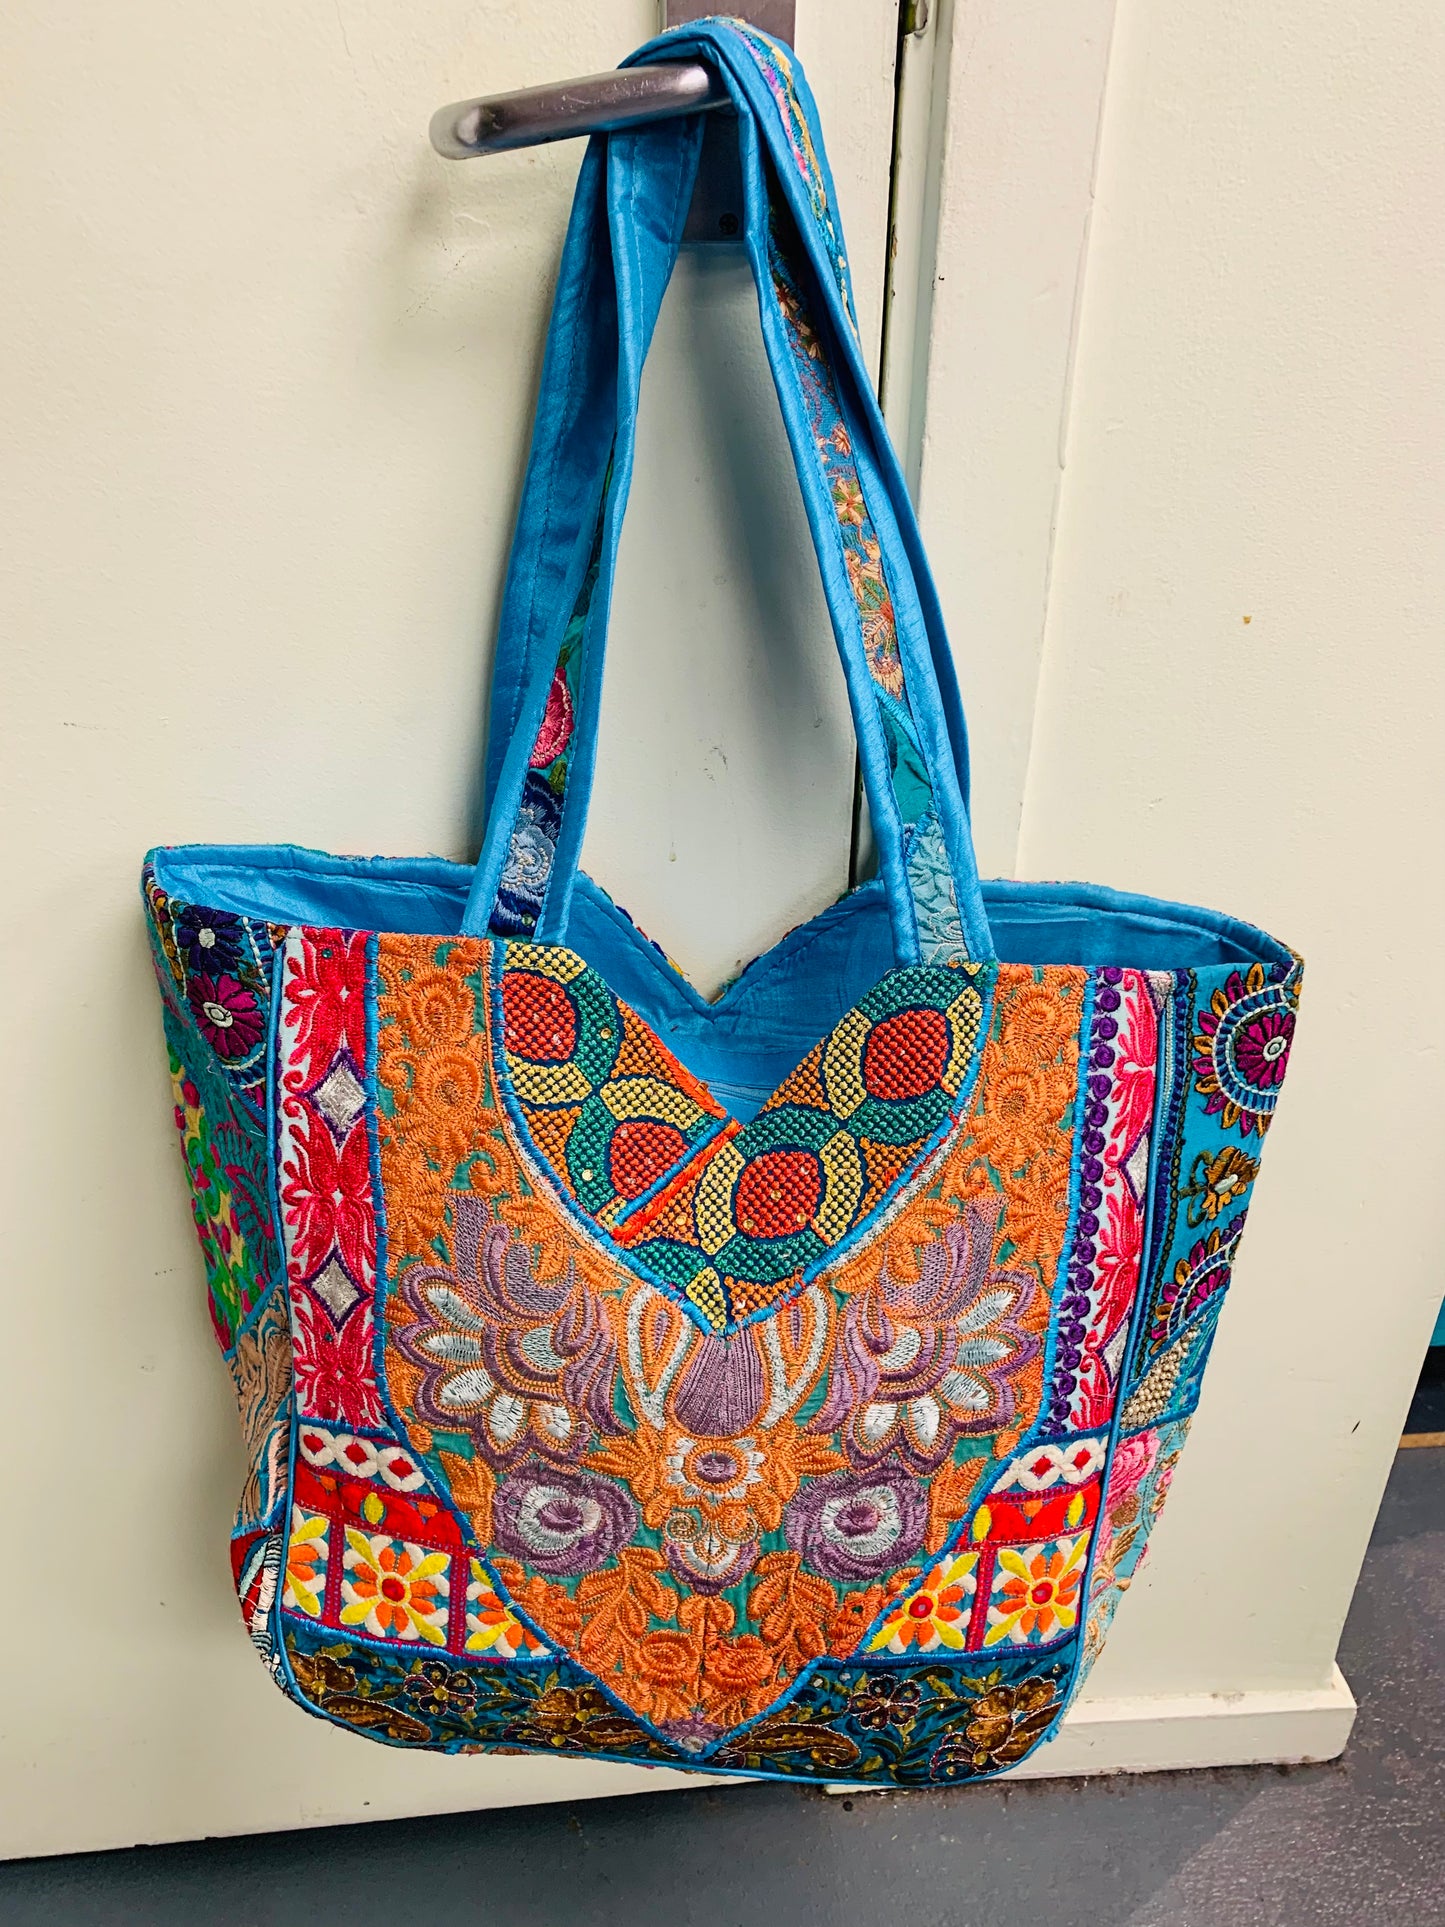 BOHEMIAN STYLE HANDCRAFTED ETHNIC TOTE BAG  # 443332